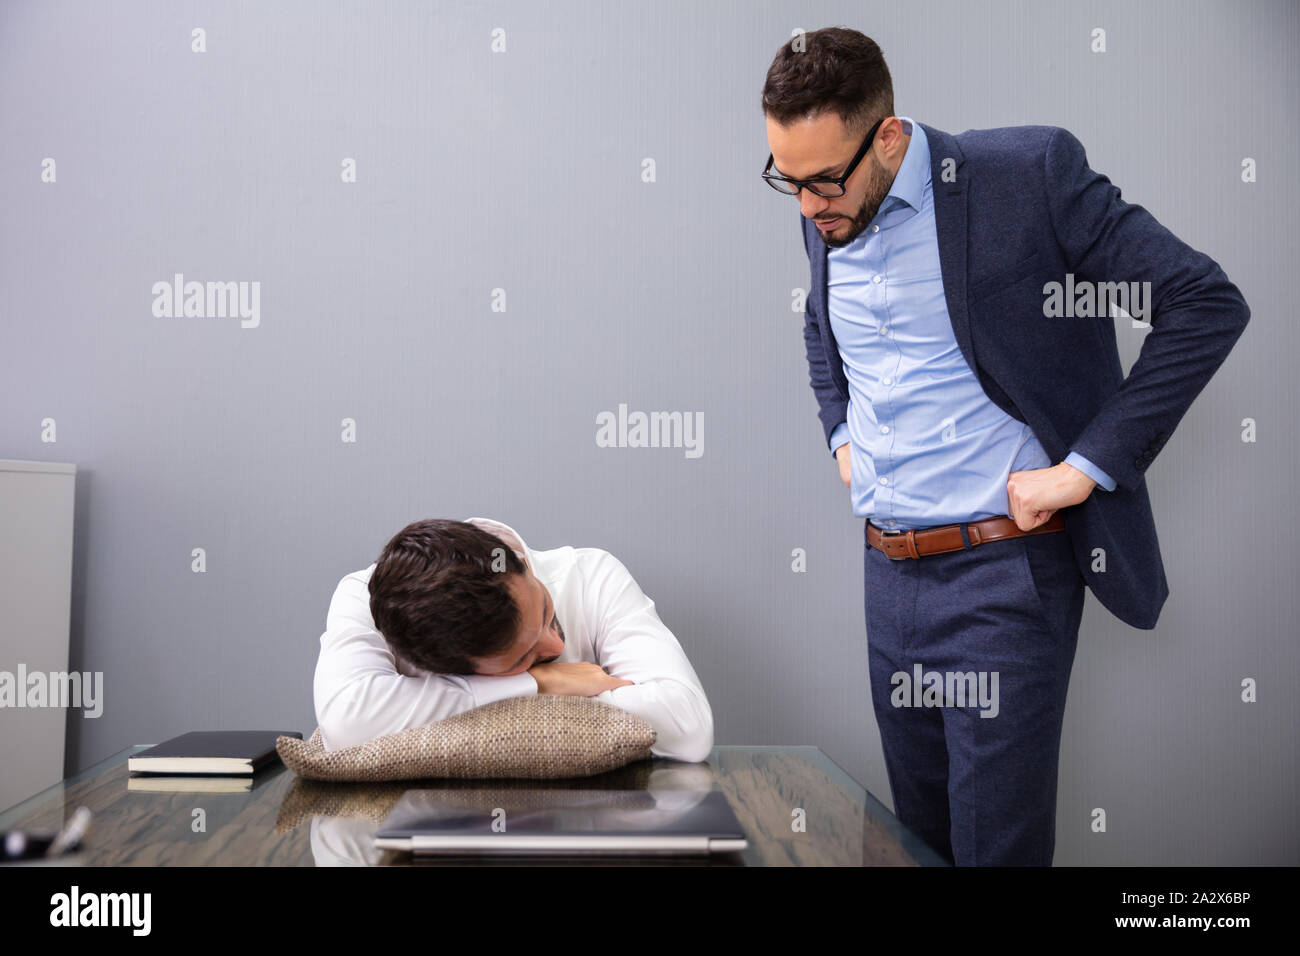 Angry Boss Caught Tired Lazy Employee Sleeping At Workplace Stock Photo